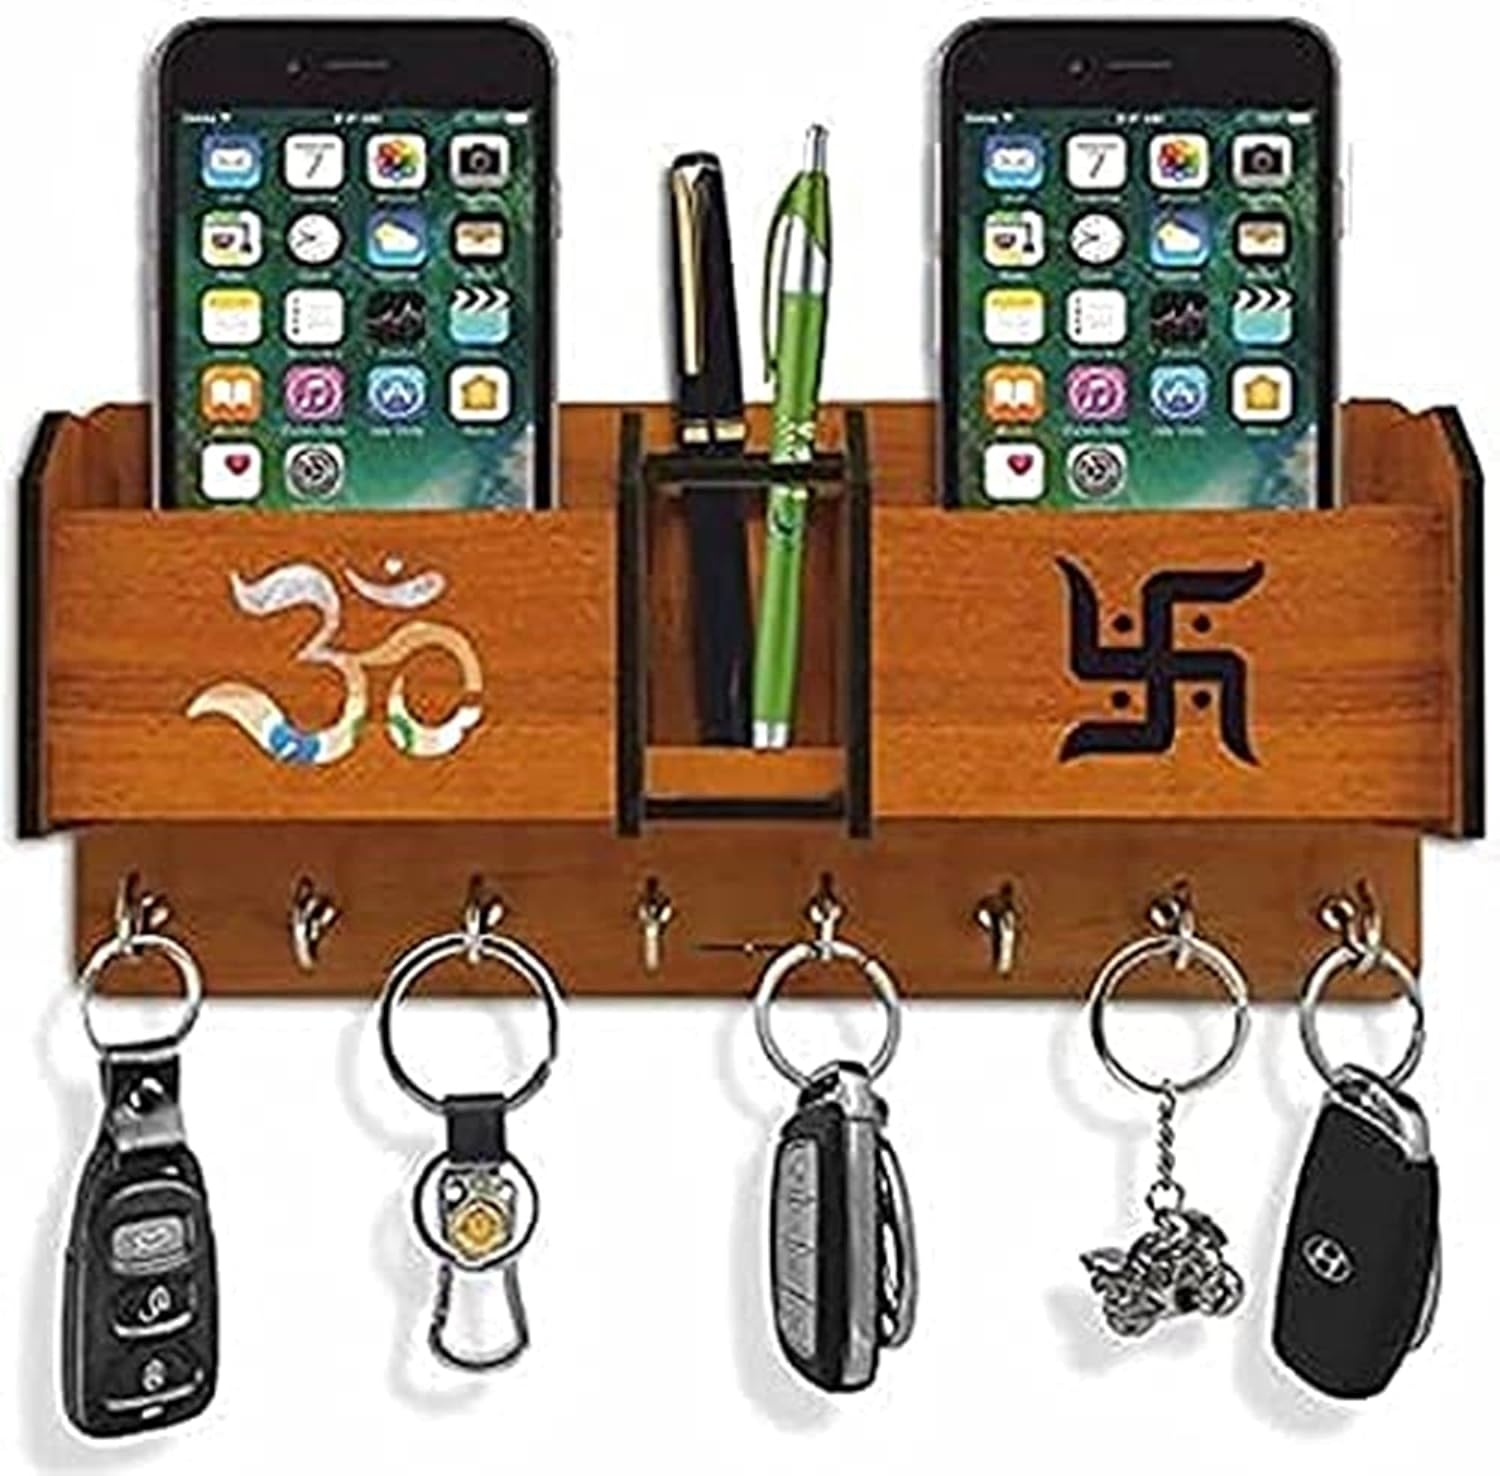 MDF Wood Wall Mounted Mobile Holder Key Stand for Wall Decor Wooden Hanger Hook Stand for Home & Office Decor (8 Hooks)